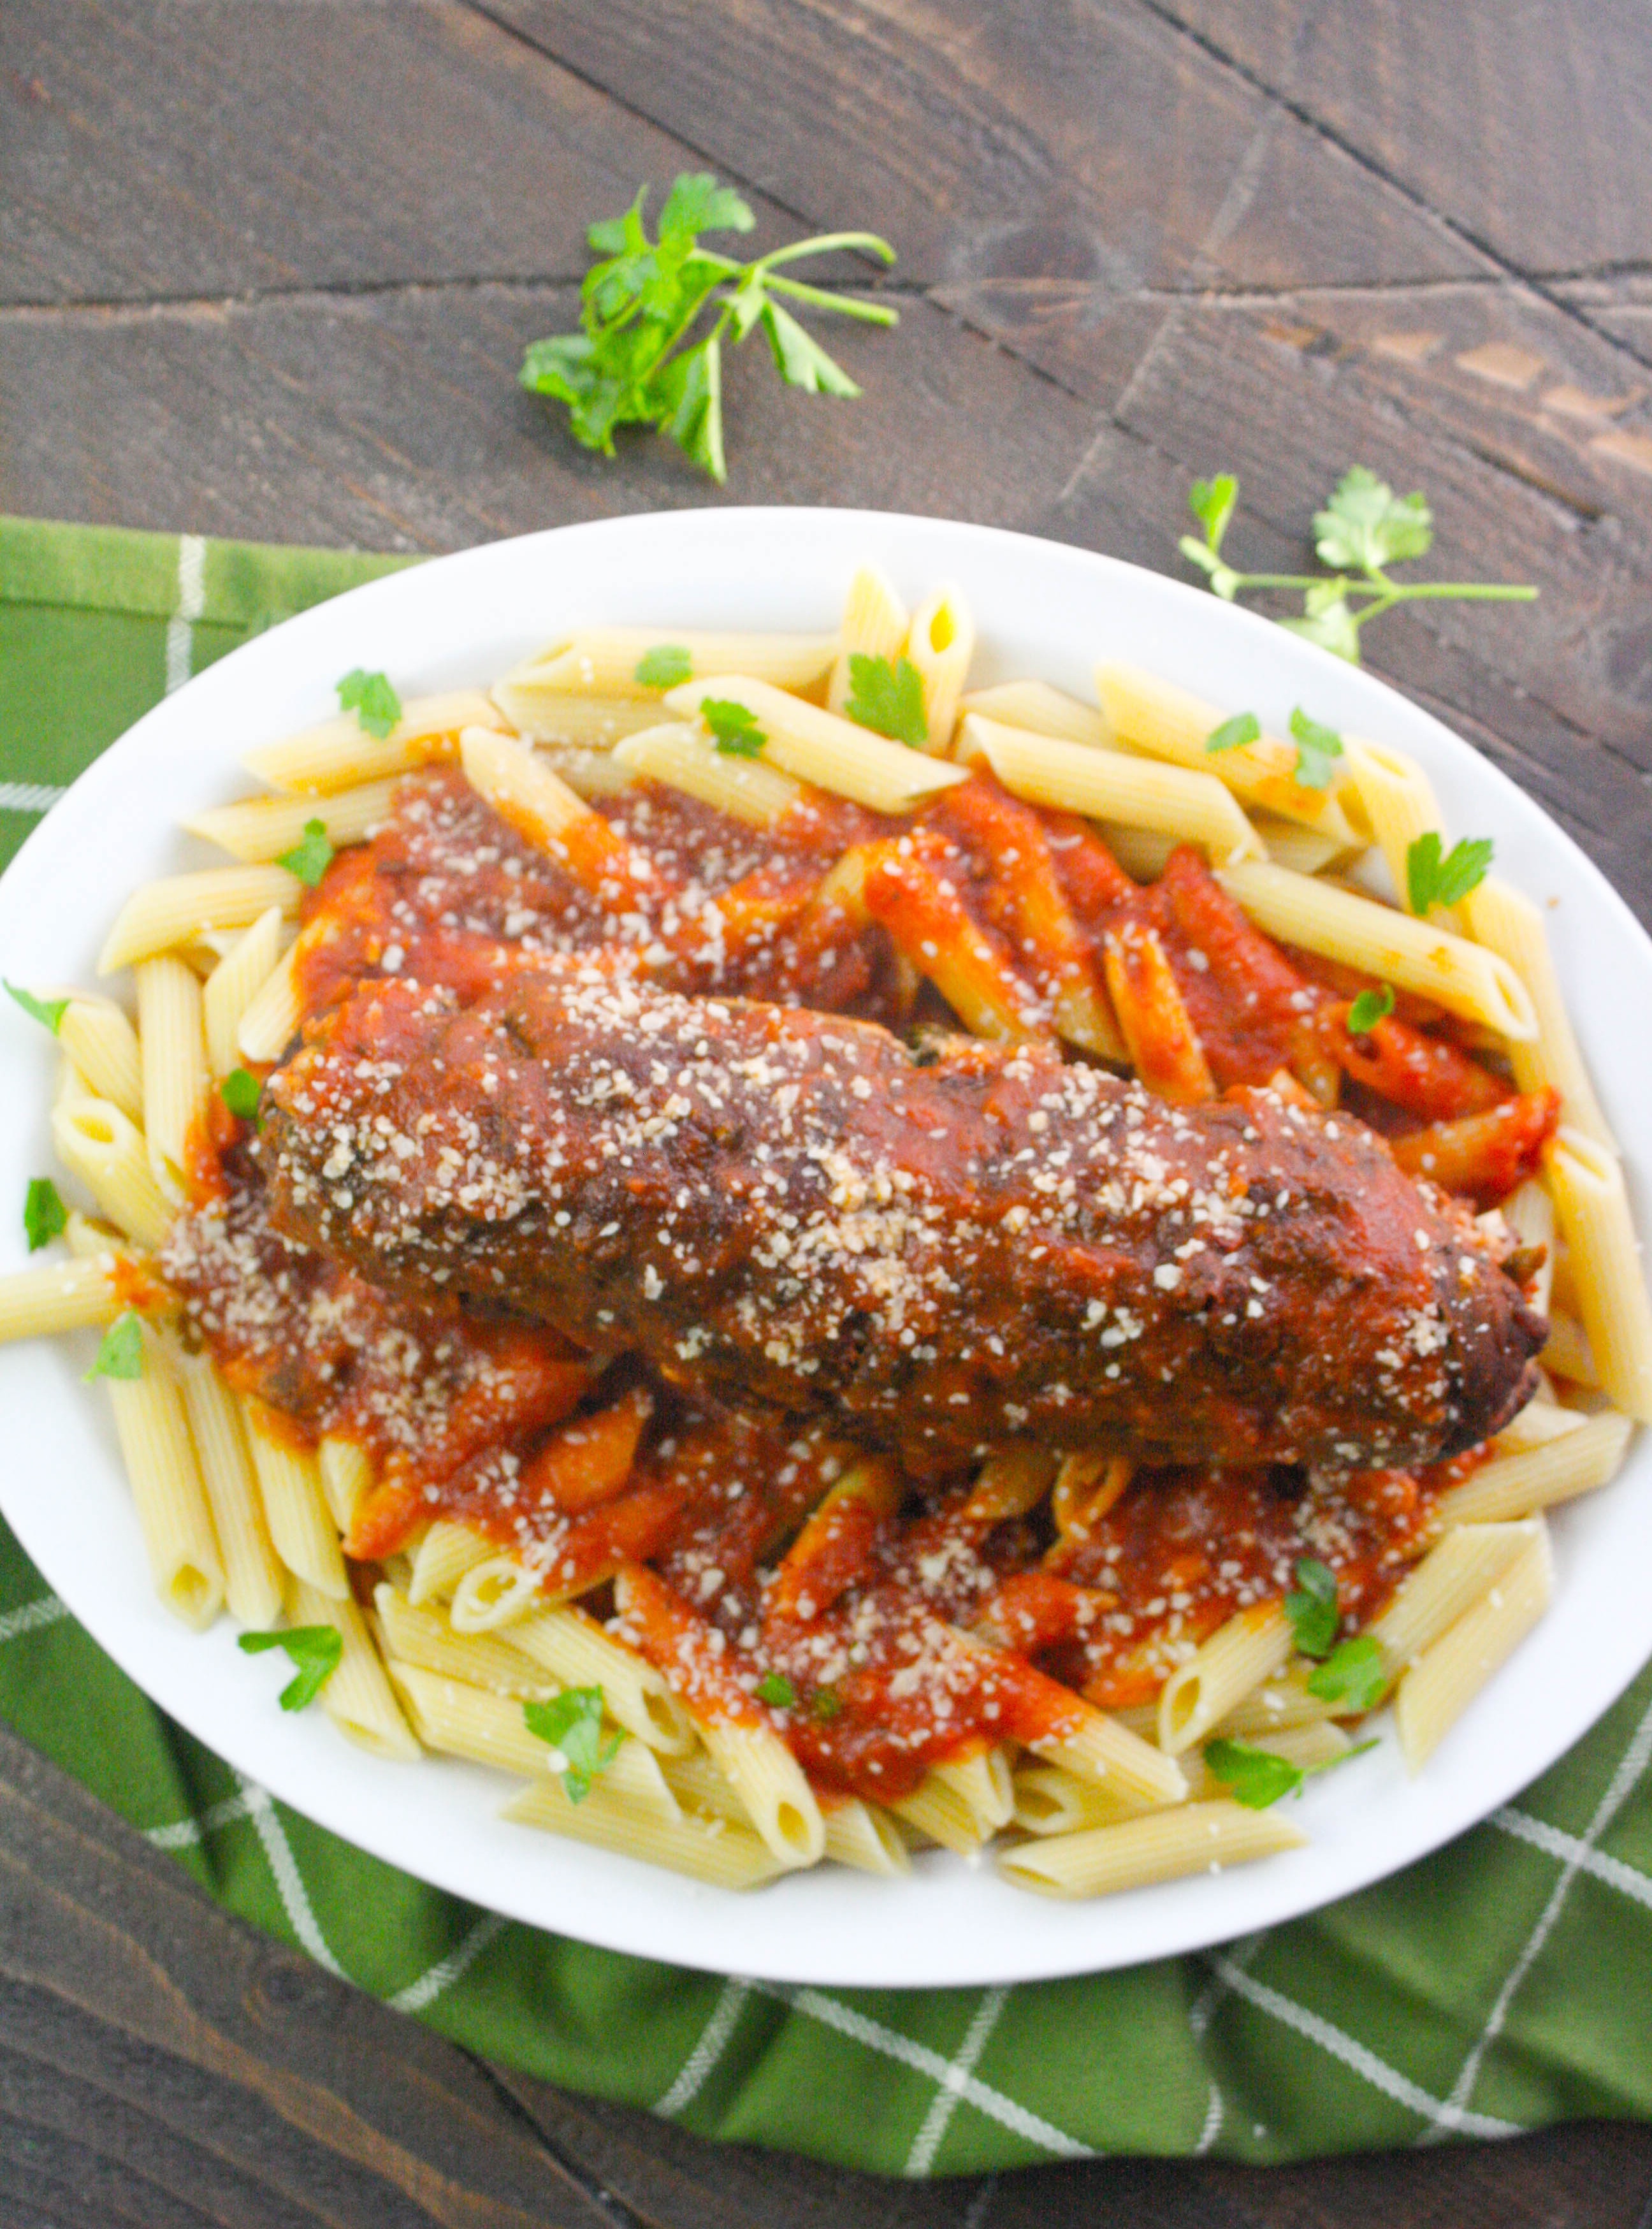 Beef Braciole is a special Italian dish that is big on fabulous flavor. Make Beef Braciole part of your next special meal.